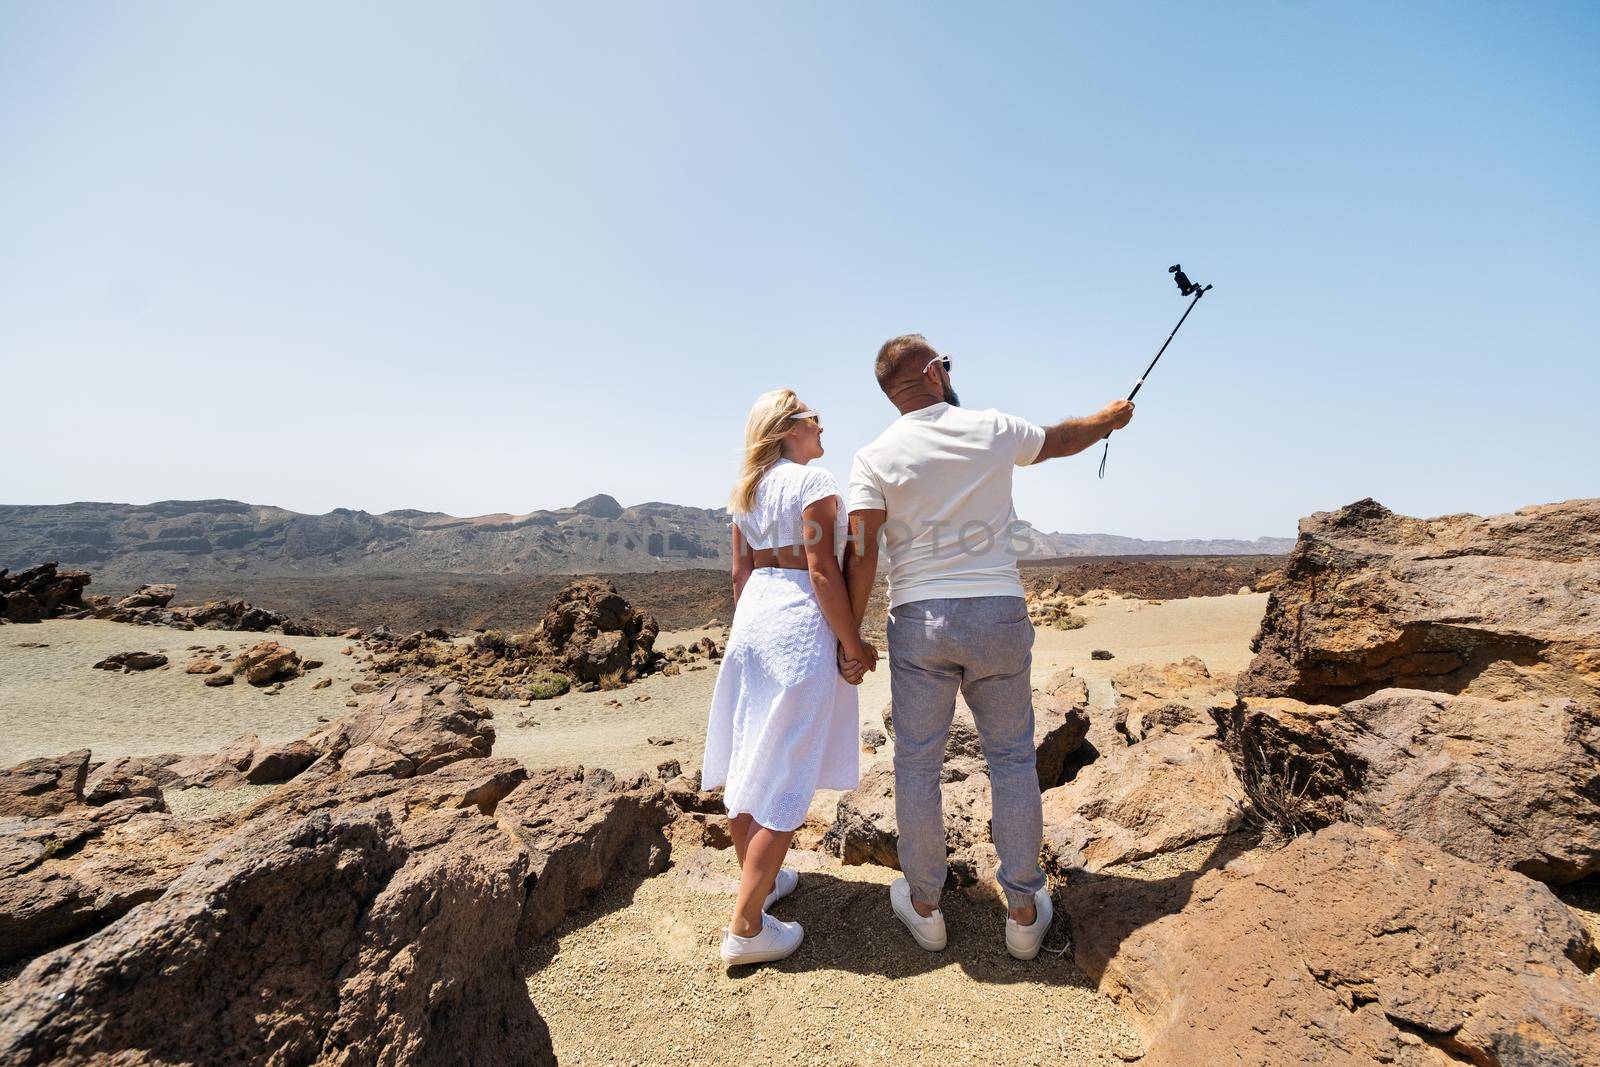 a stylish woman takes a selfie in the crater of the Teide volcano. Desert landscape in Tenerife. Teide National Park. Desert crater of the Teide volcano. Tenerife, Canary Islands.